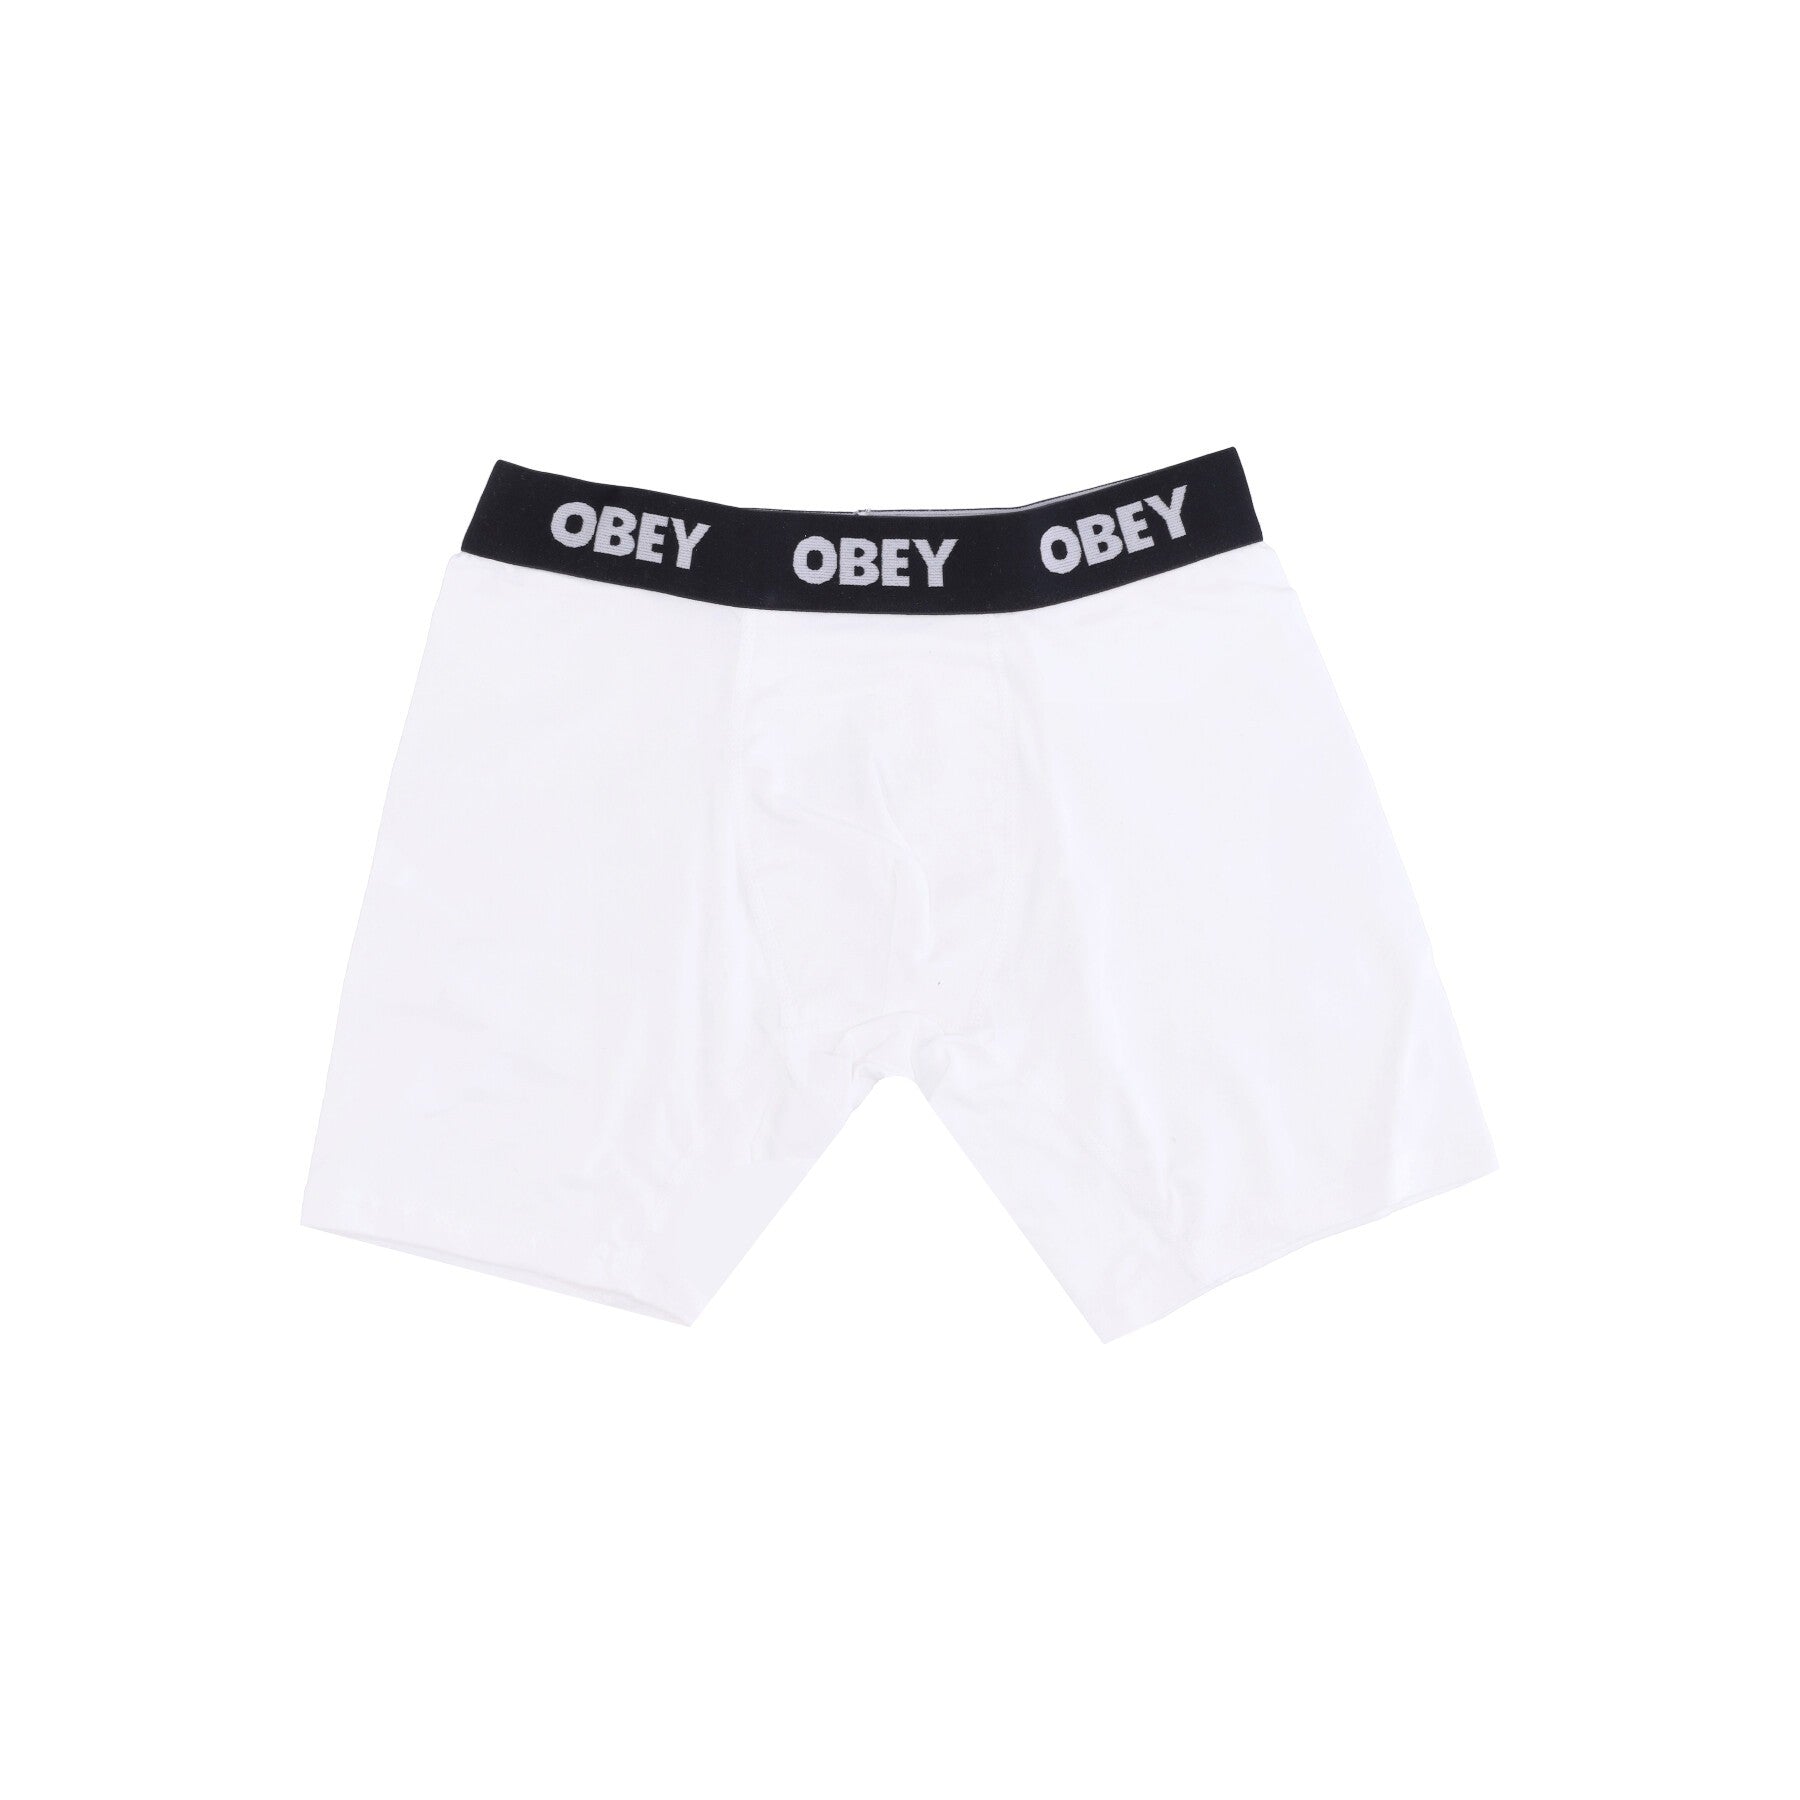 Obey, Boxer Uomo Established Work 2 Pack Boxers, 